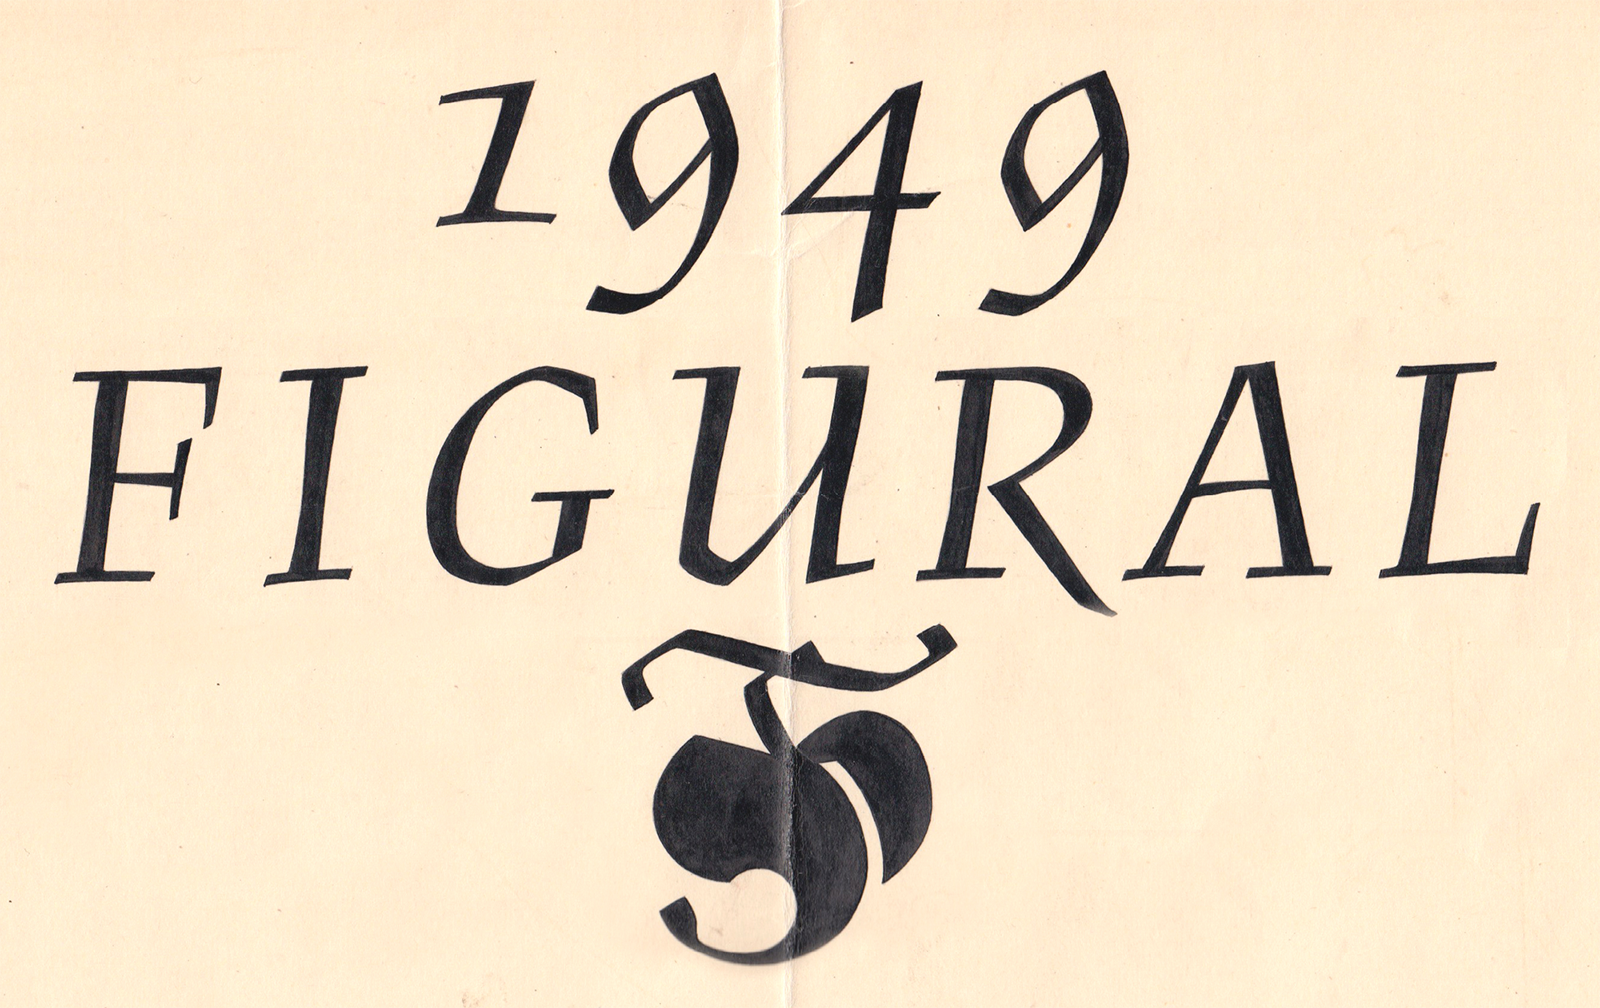 Ink drawing typeface design of Figural Kursiva, 1949, from the archive of Stanislav Maršo Jr.